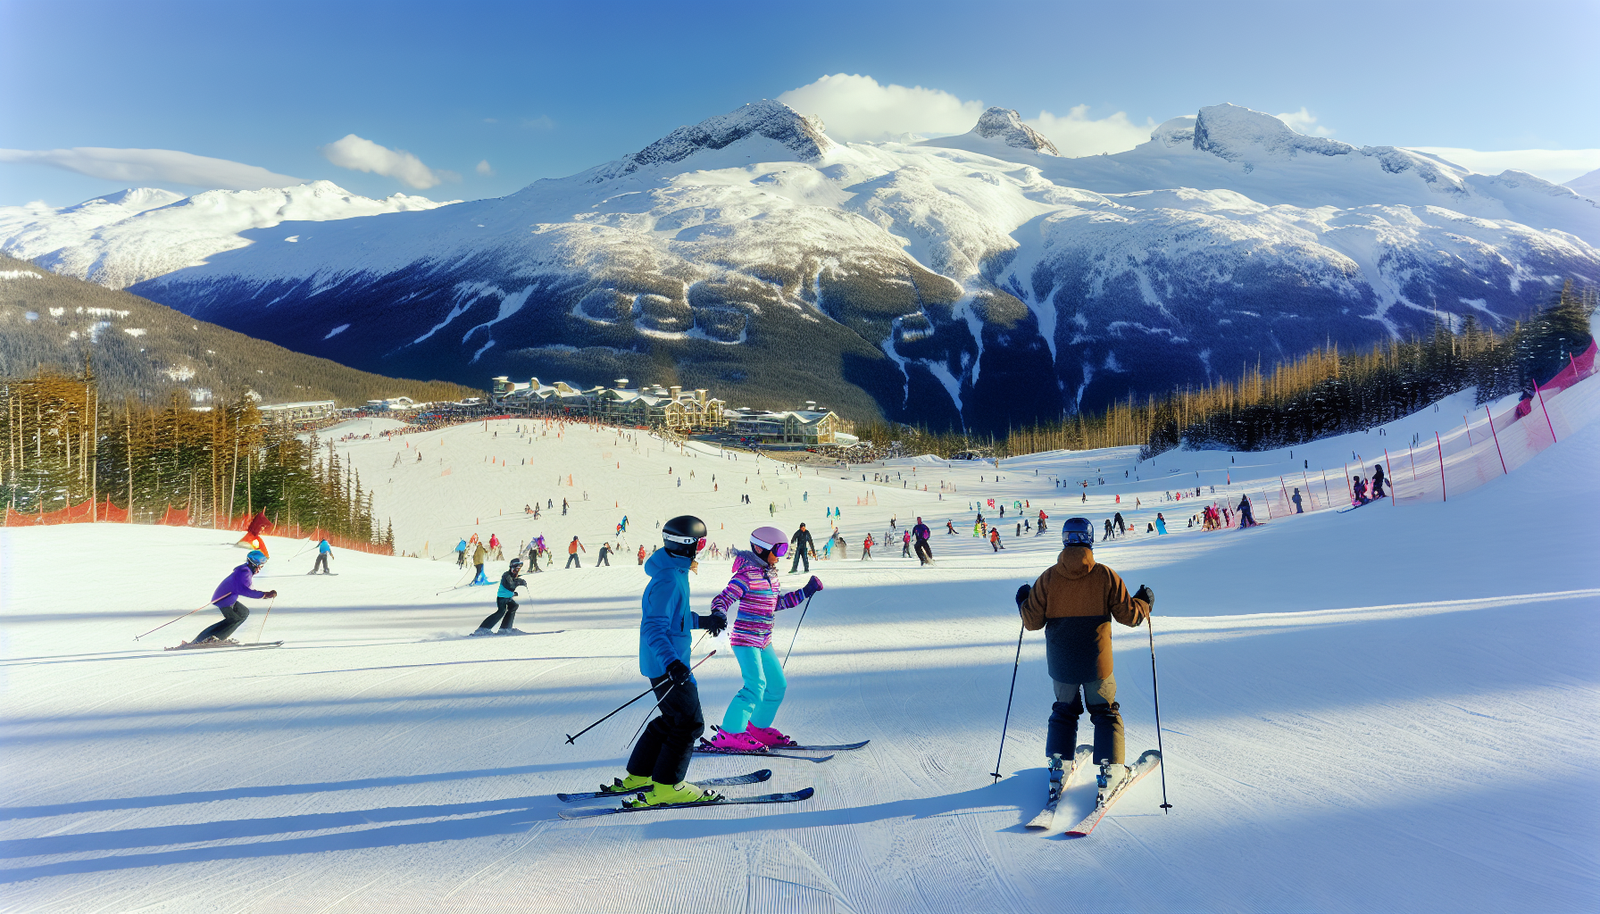 Vancouver Skiing in Whistler Blackcomb